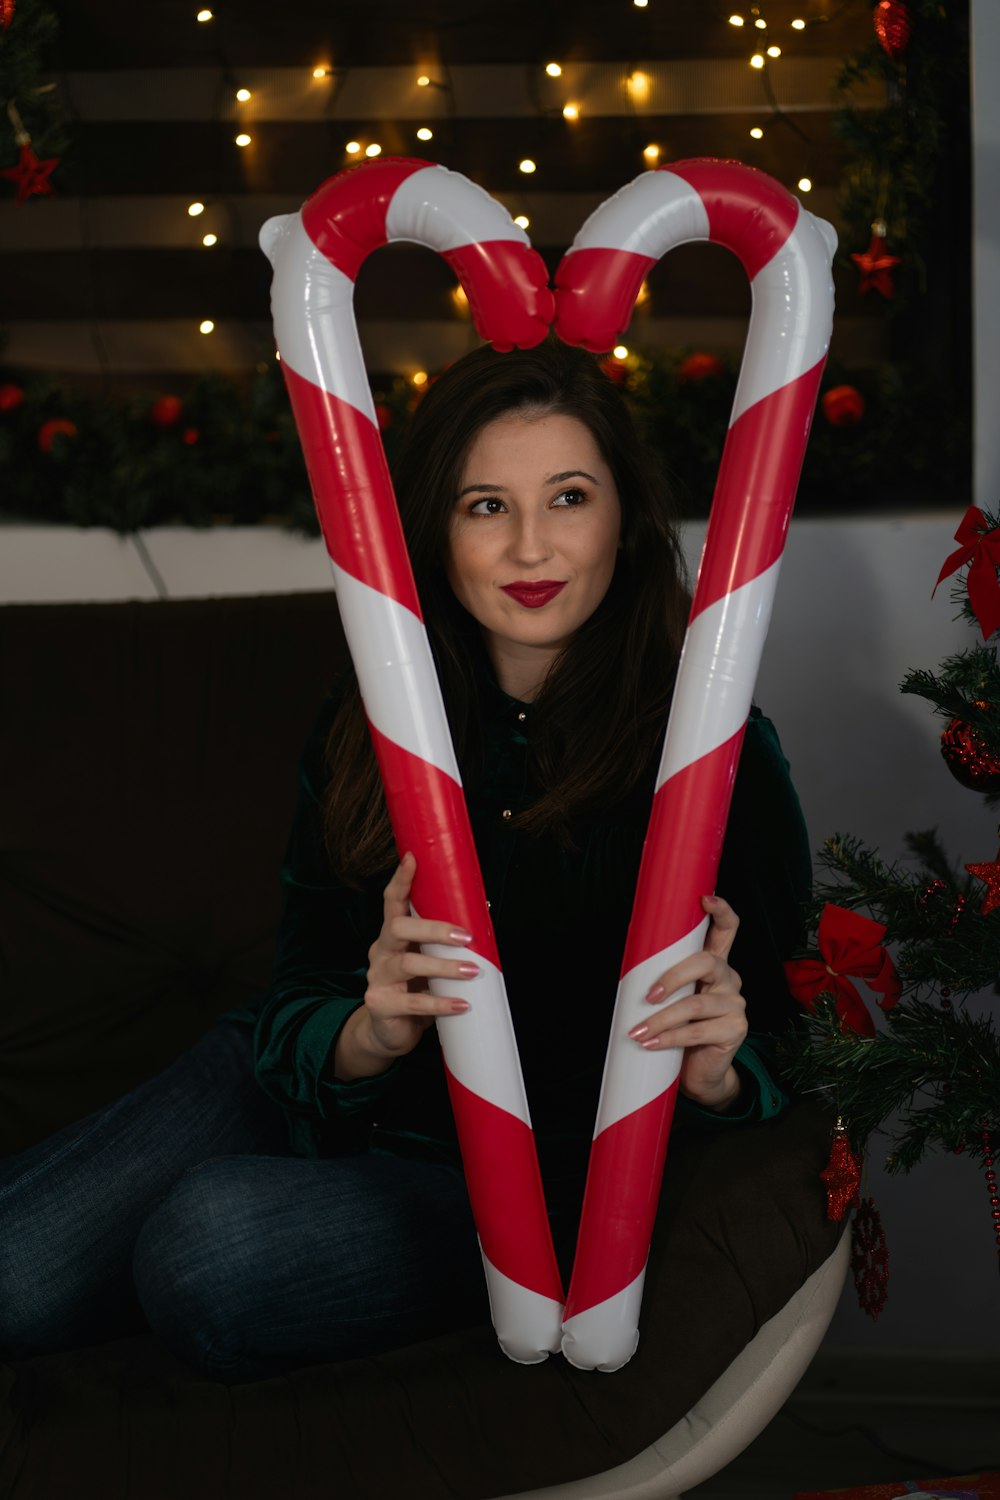 a woman sitting on a couch holding two giant candy canes